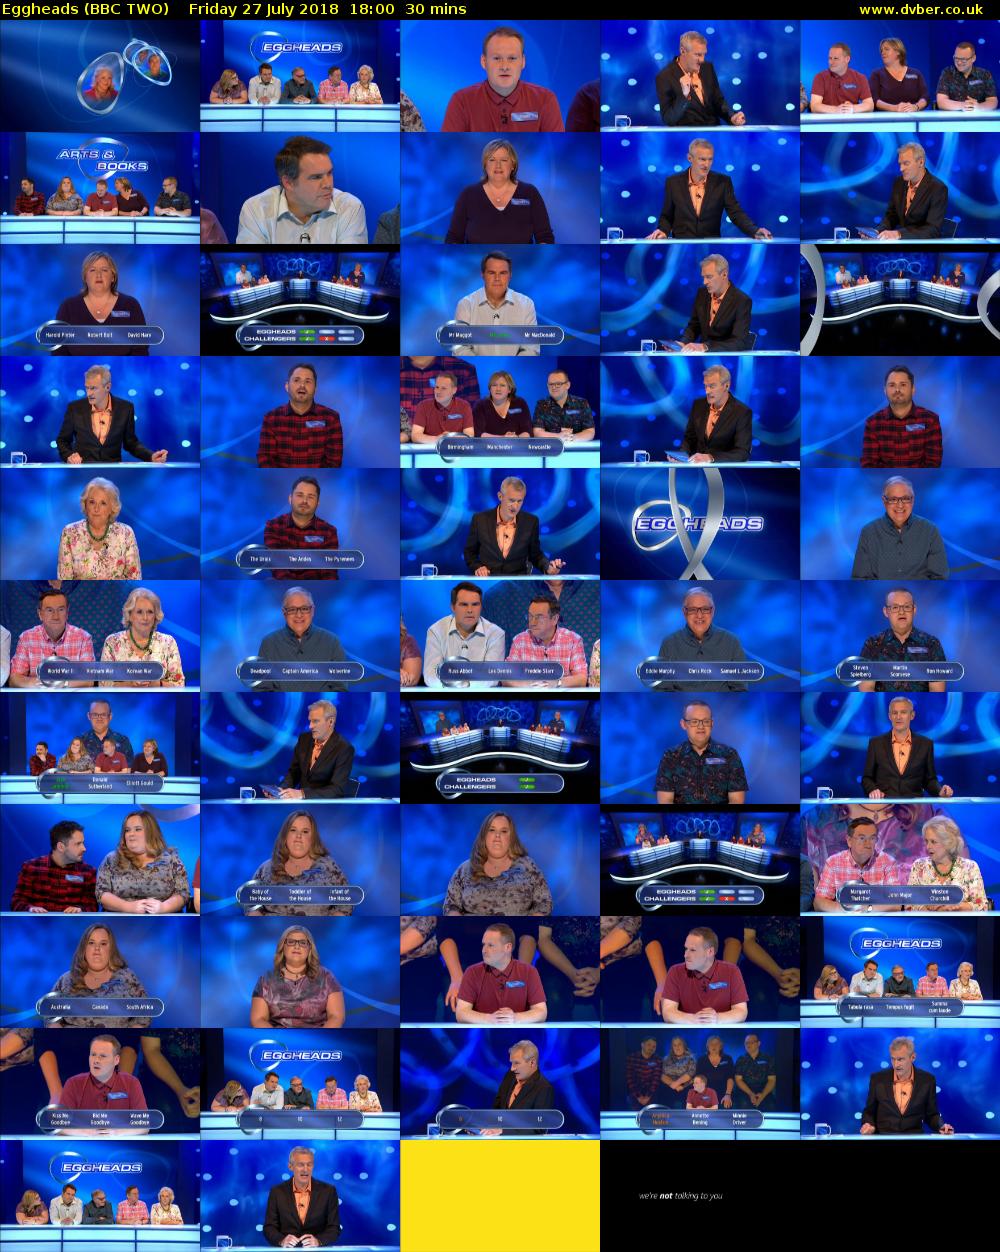 Eggheads (BBC TWO) Friday 27 July 2018 18:00 - 18:30